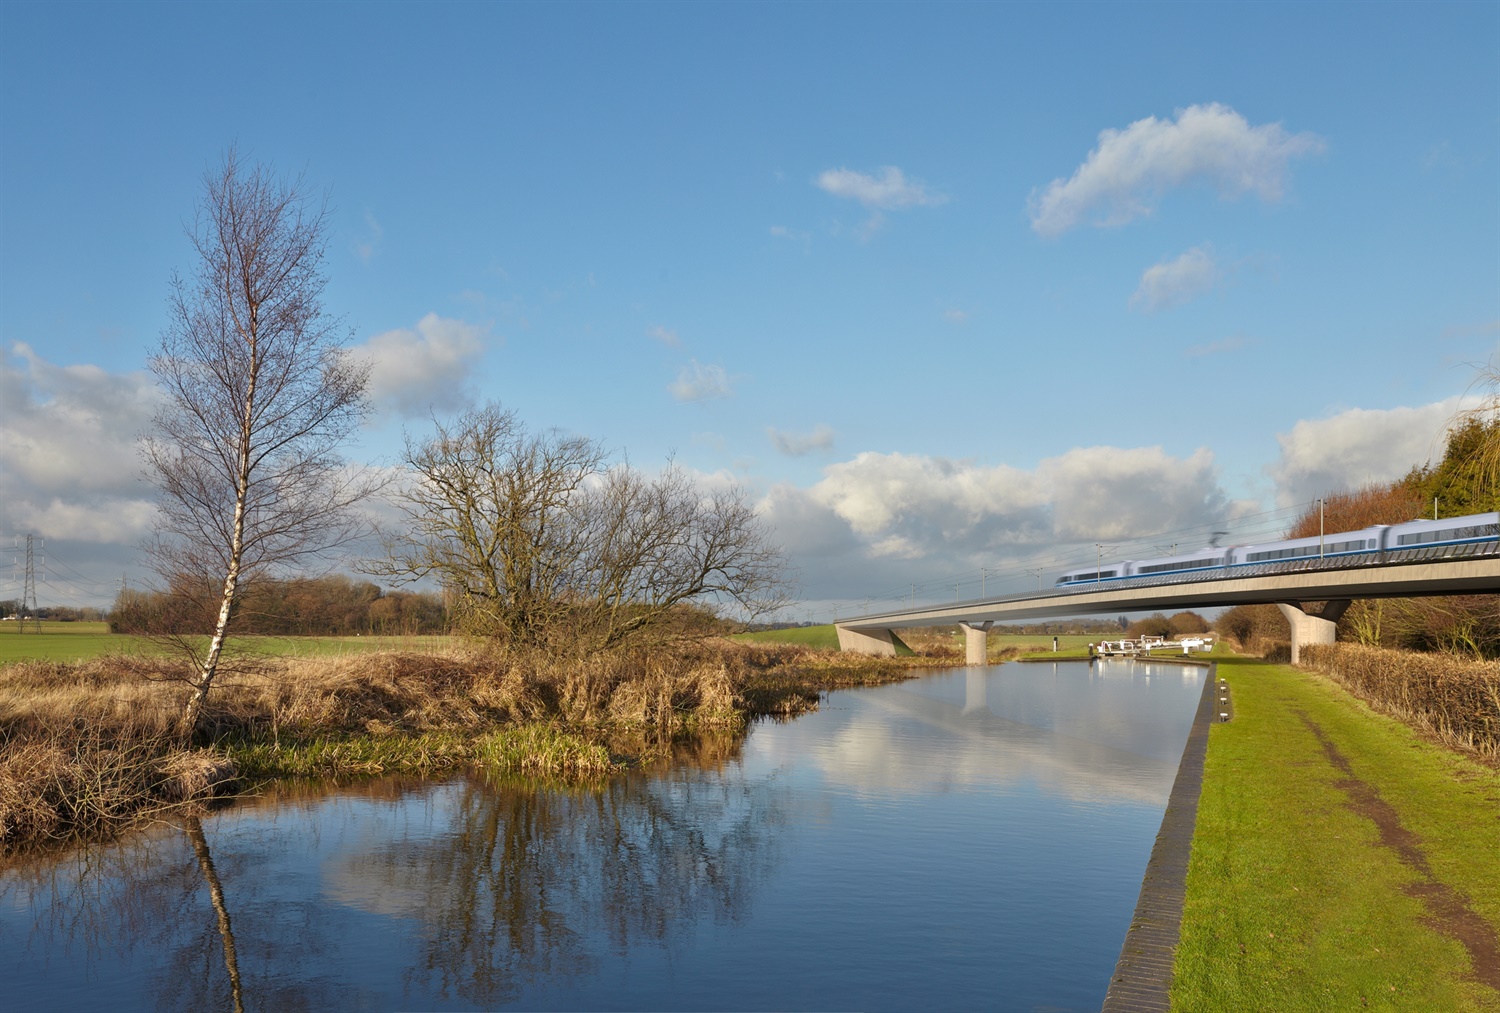 Amended HS2 works add half a billion pounds to the project’s cost